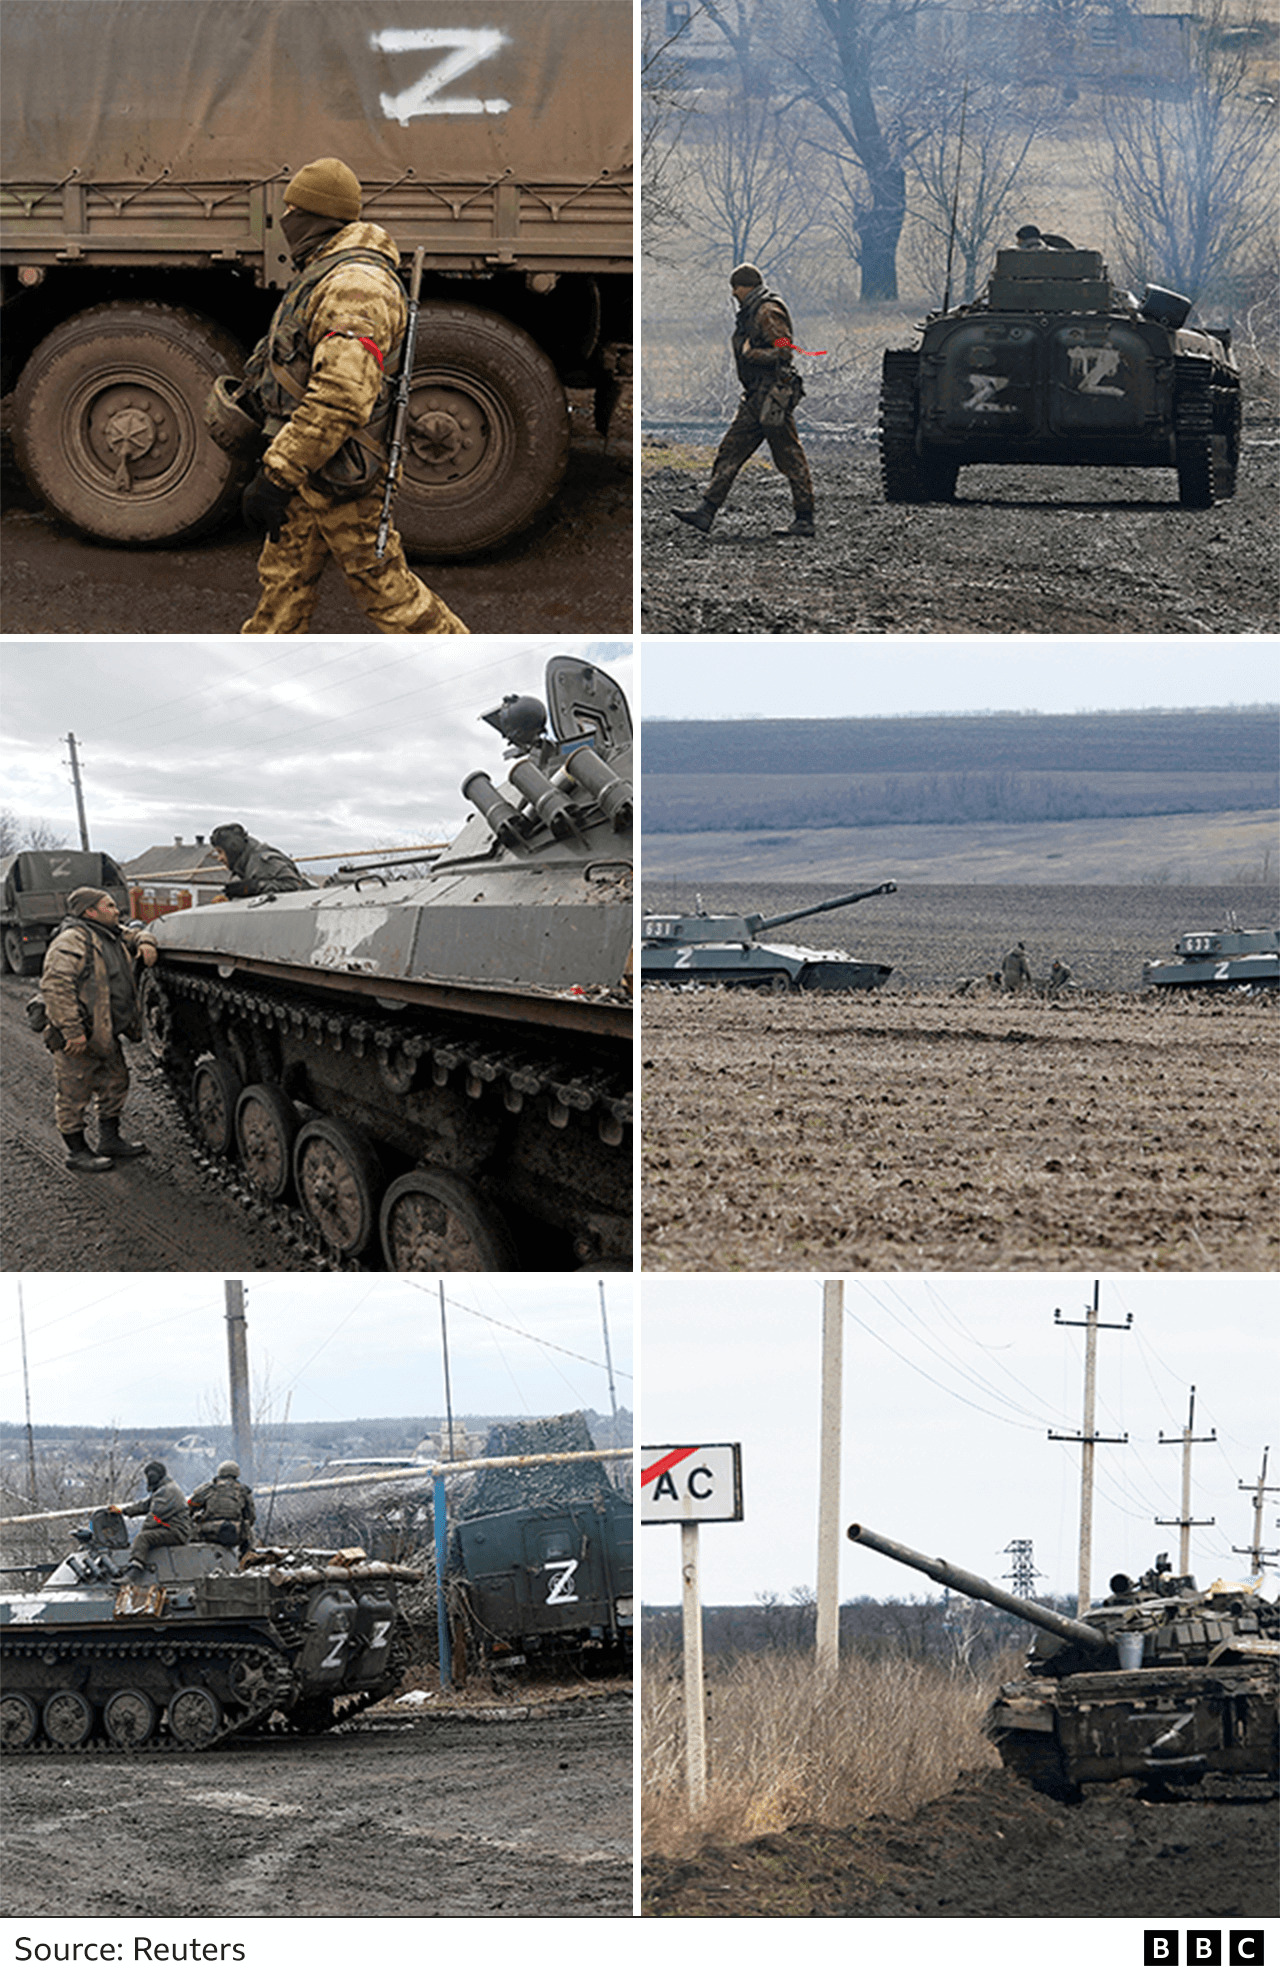 Russian military vehicles with "Z" on them